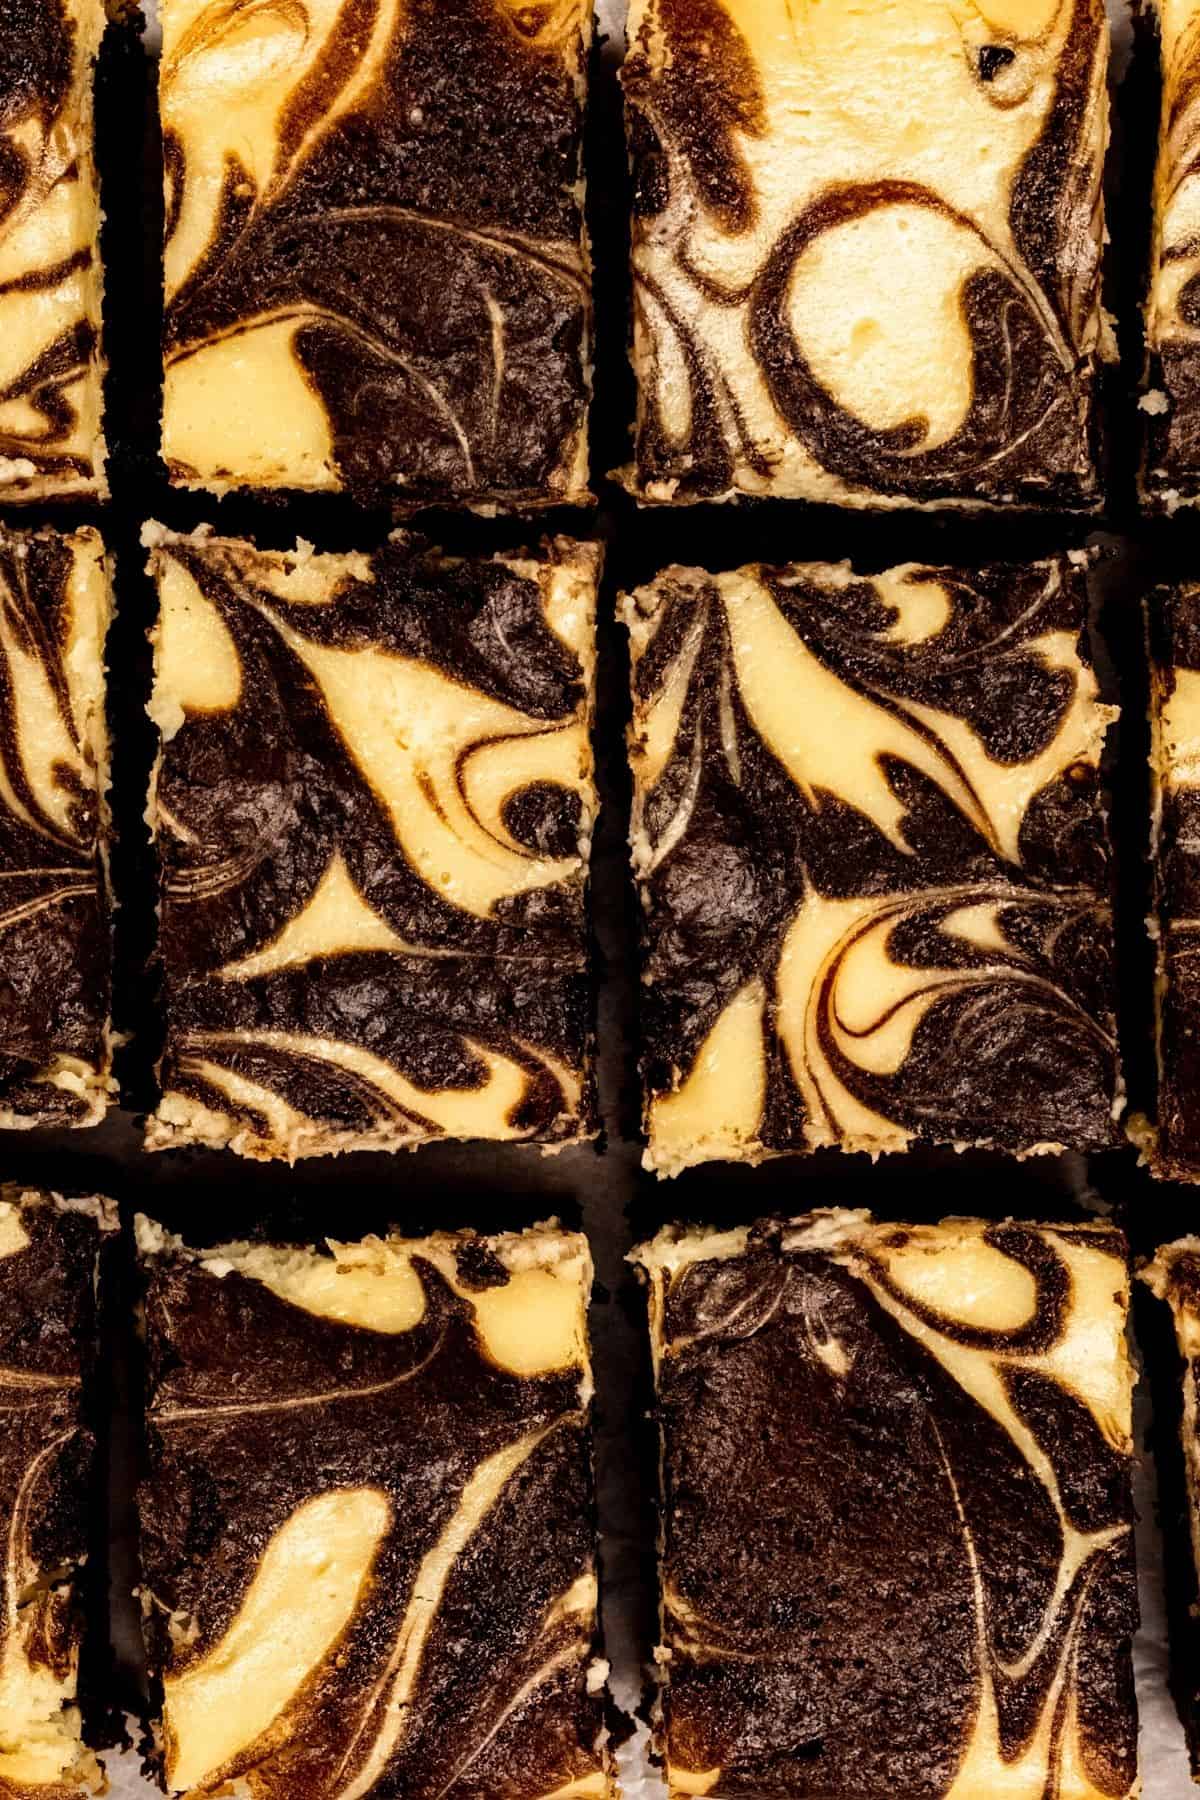 Looking down at cheesecake brownies up close. You can see them sliced into rectangles and the cheesecake and brownie batter have been swirled together on top to look pretty.